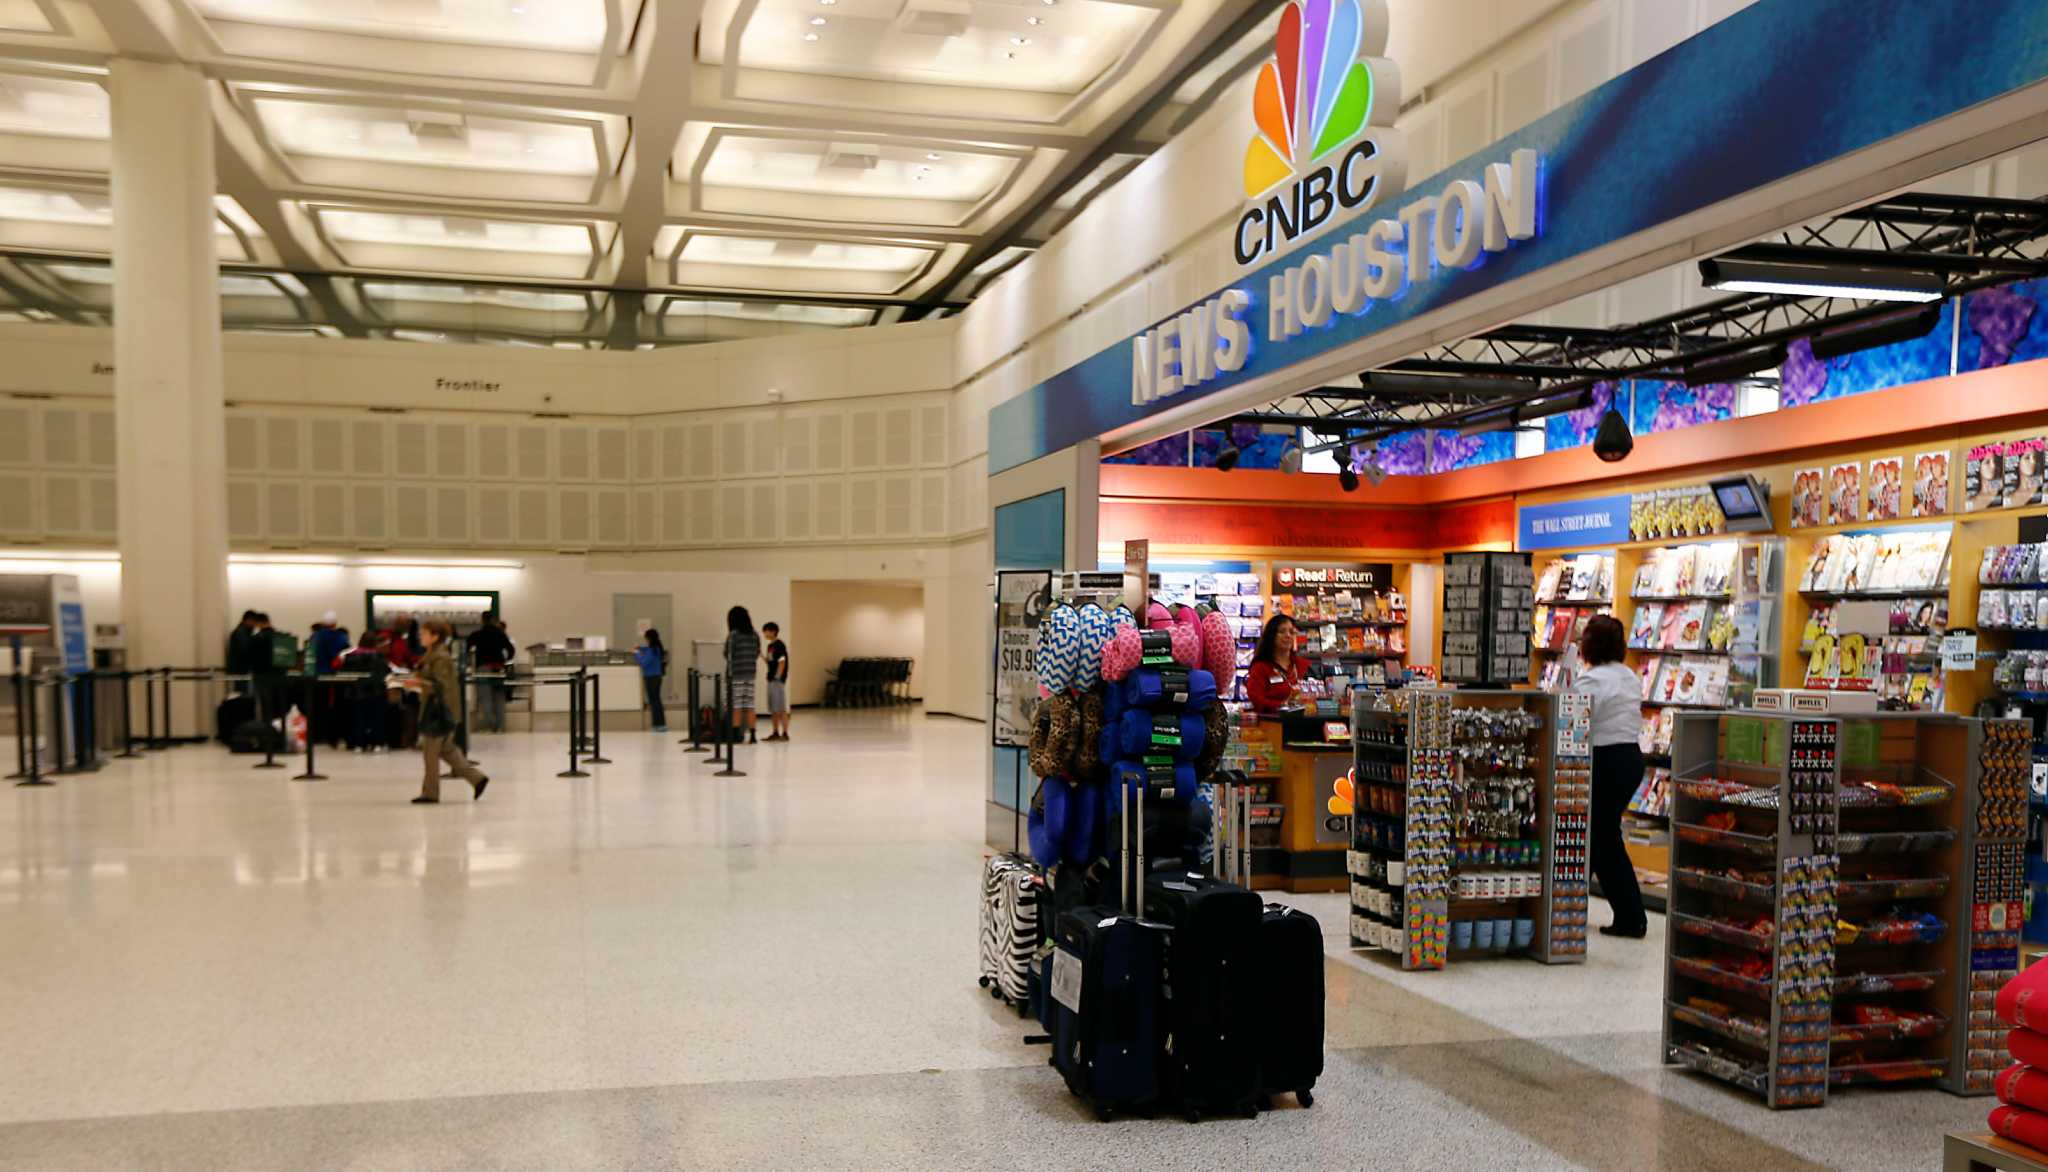 Houston Restaurant Group Alleges Malfeasance in City's Airport Contract  Award, Issues